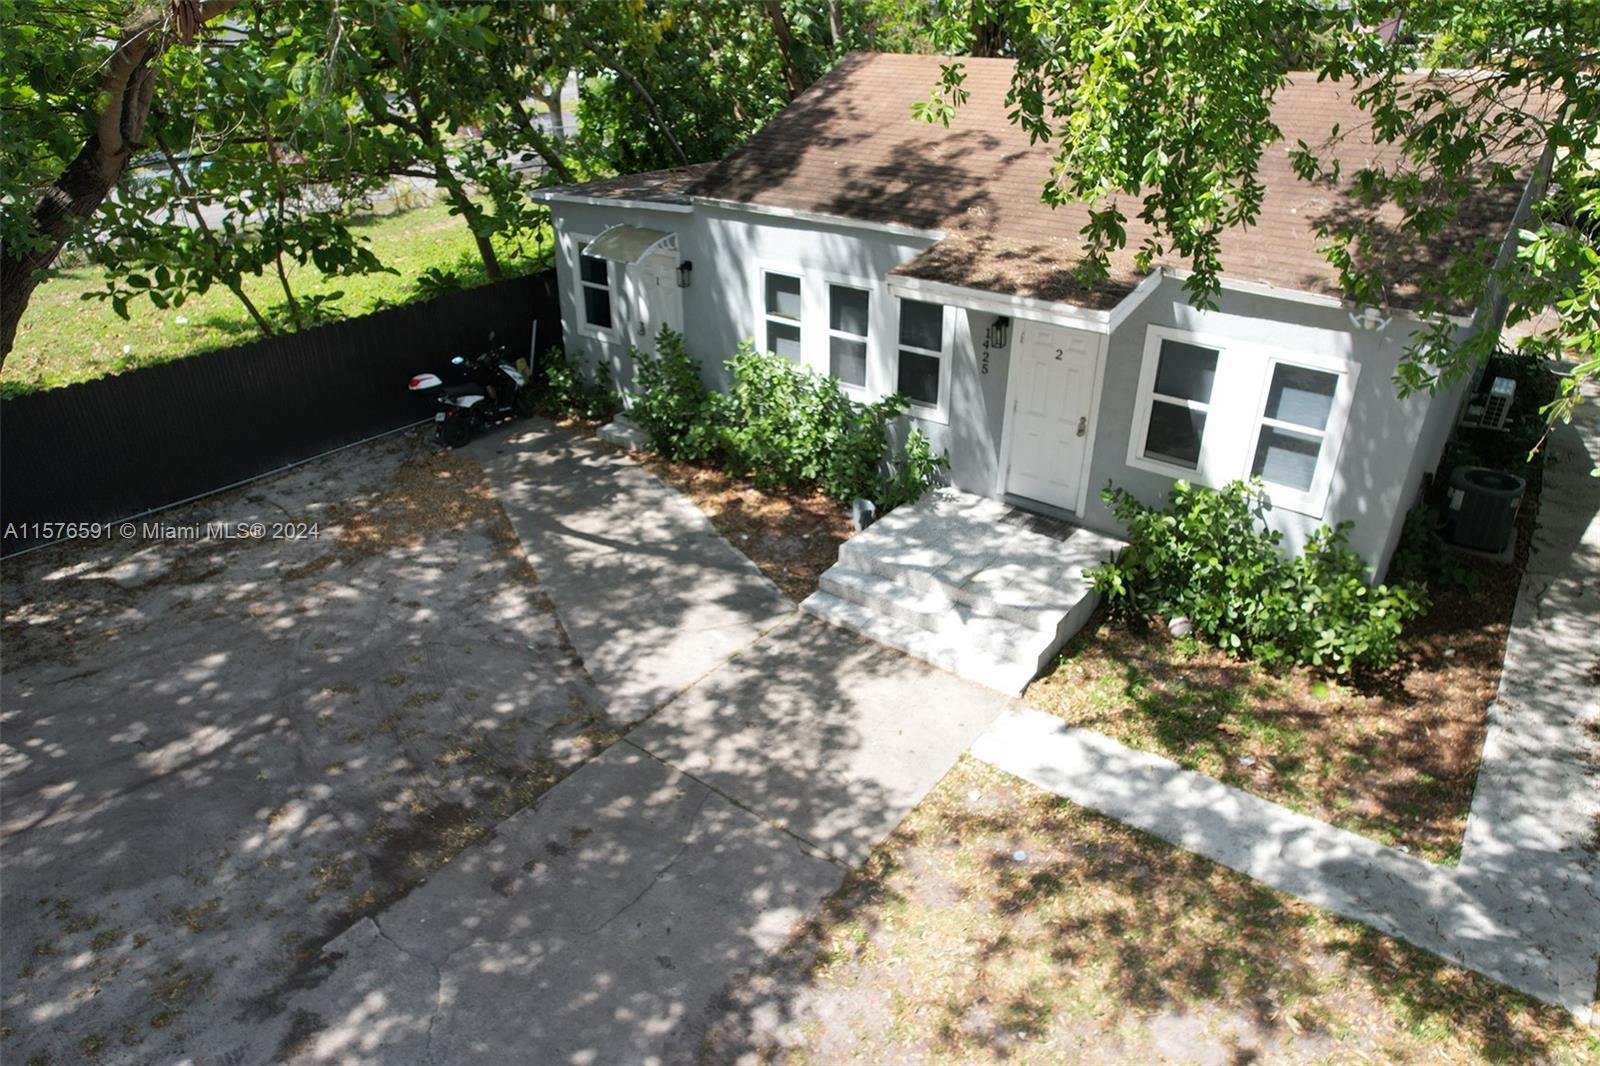 Photo of 1425 NW 54th St in Miami, FL